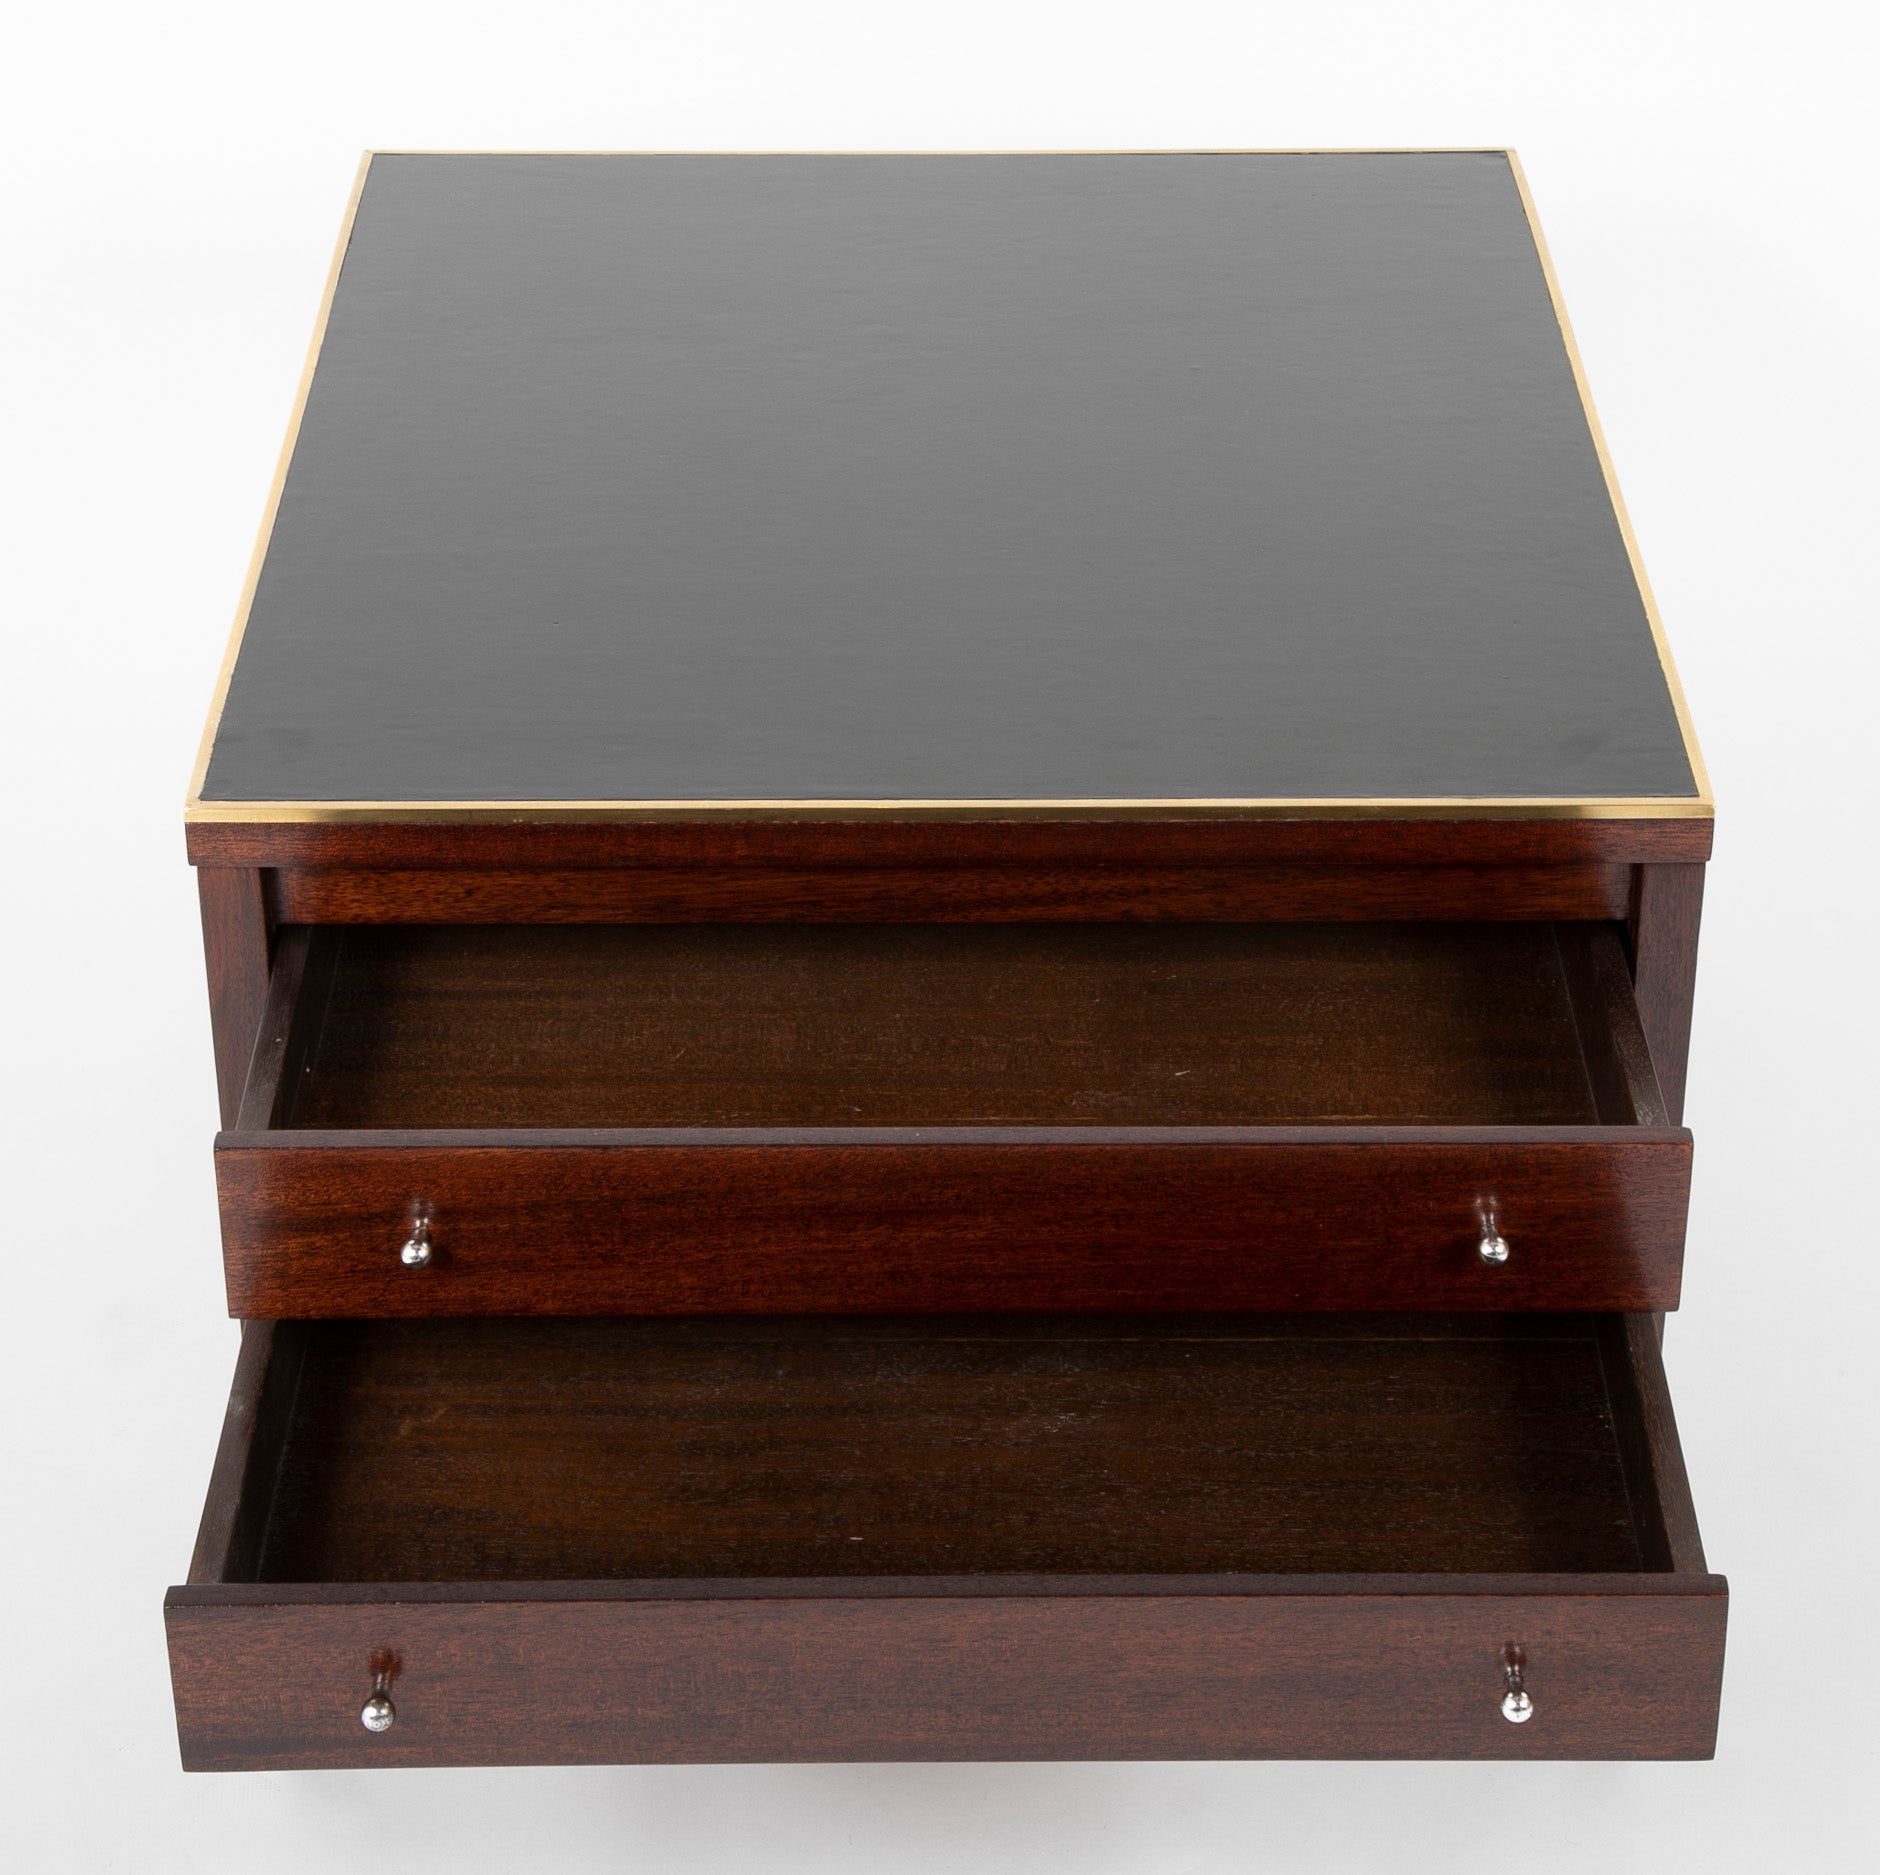 Pair of Occasional Black Leather Top Walnut Tables by Paul McCobb for Calvin Irwin